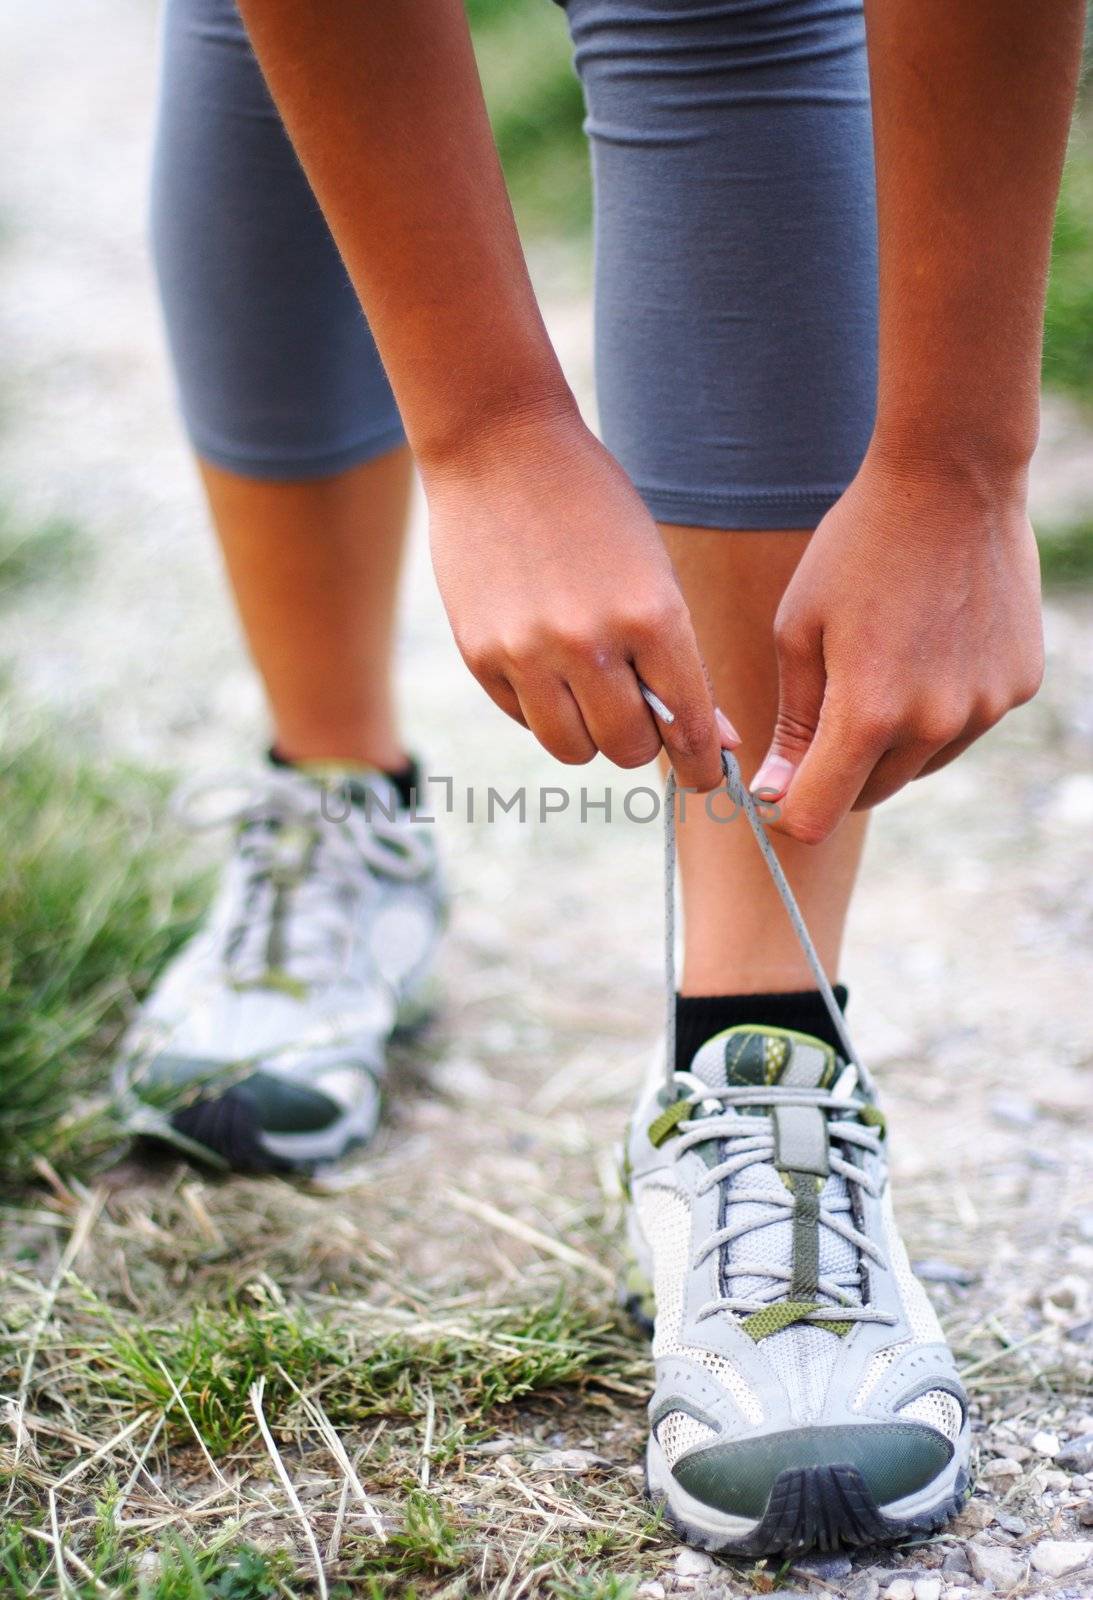 Running shoes being tied by woman getting ready for jogging.